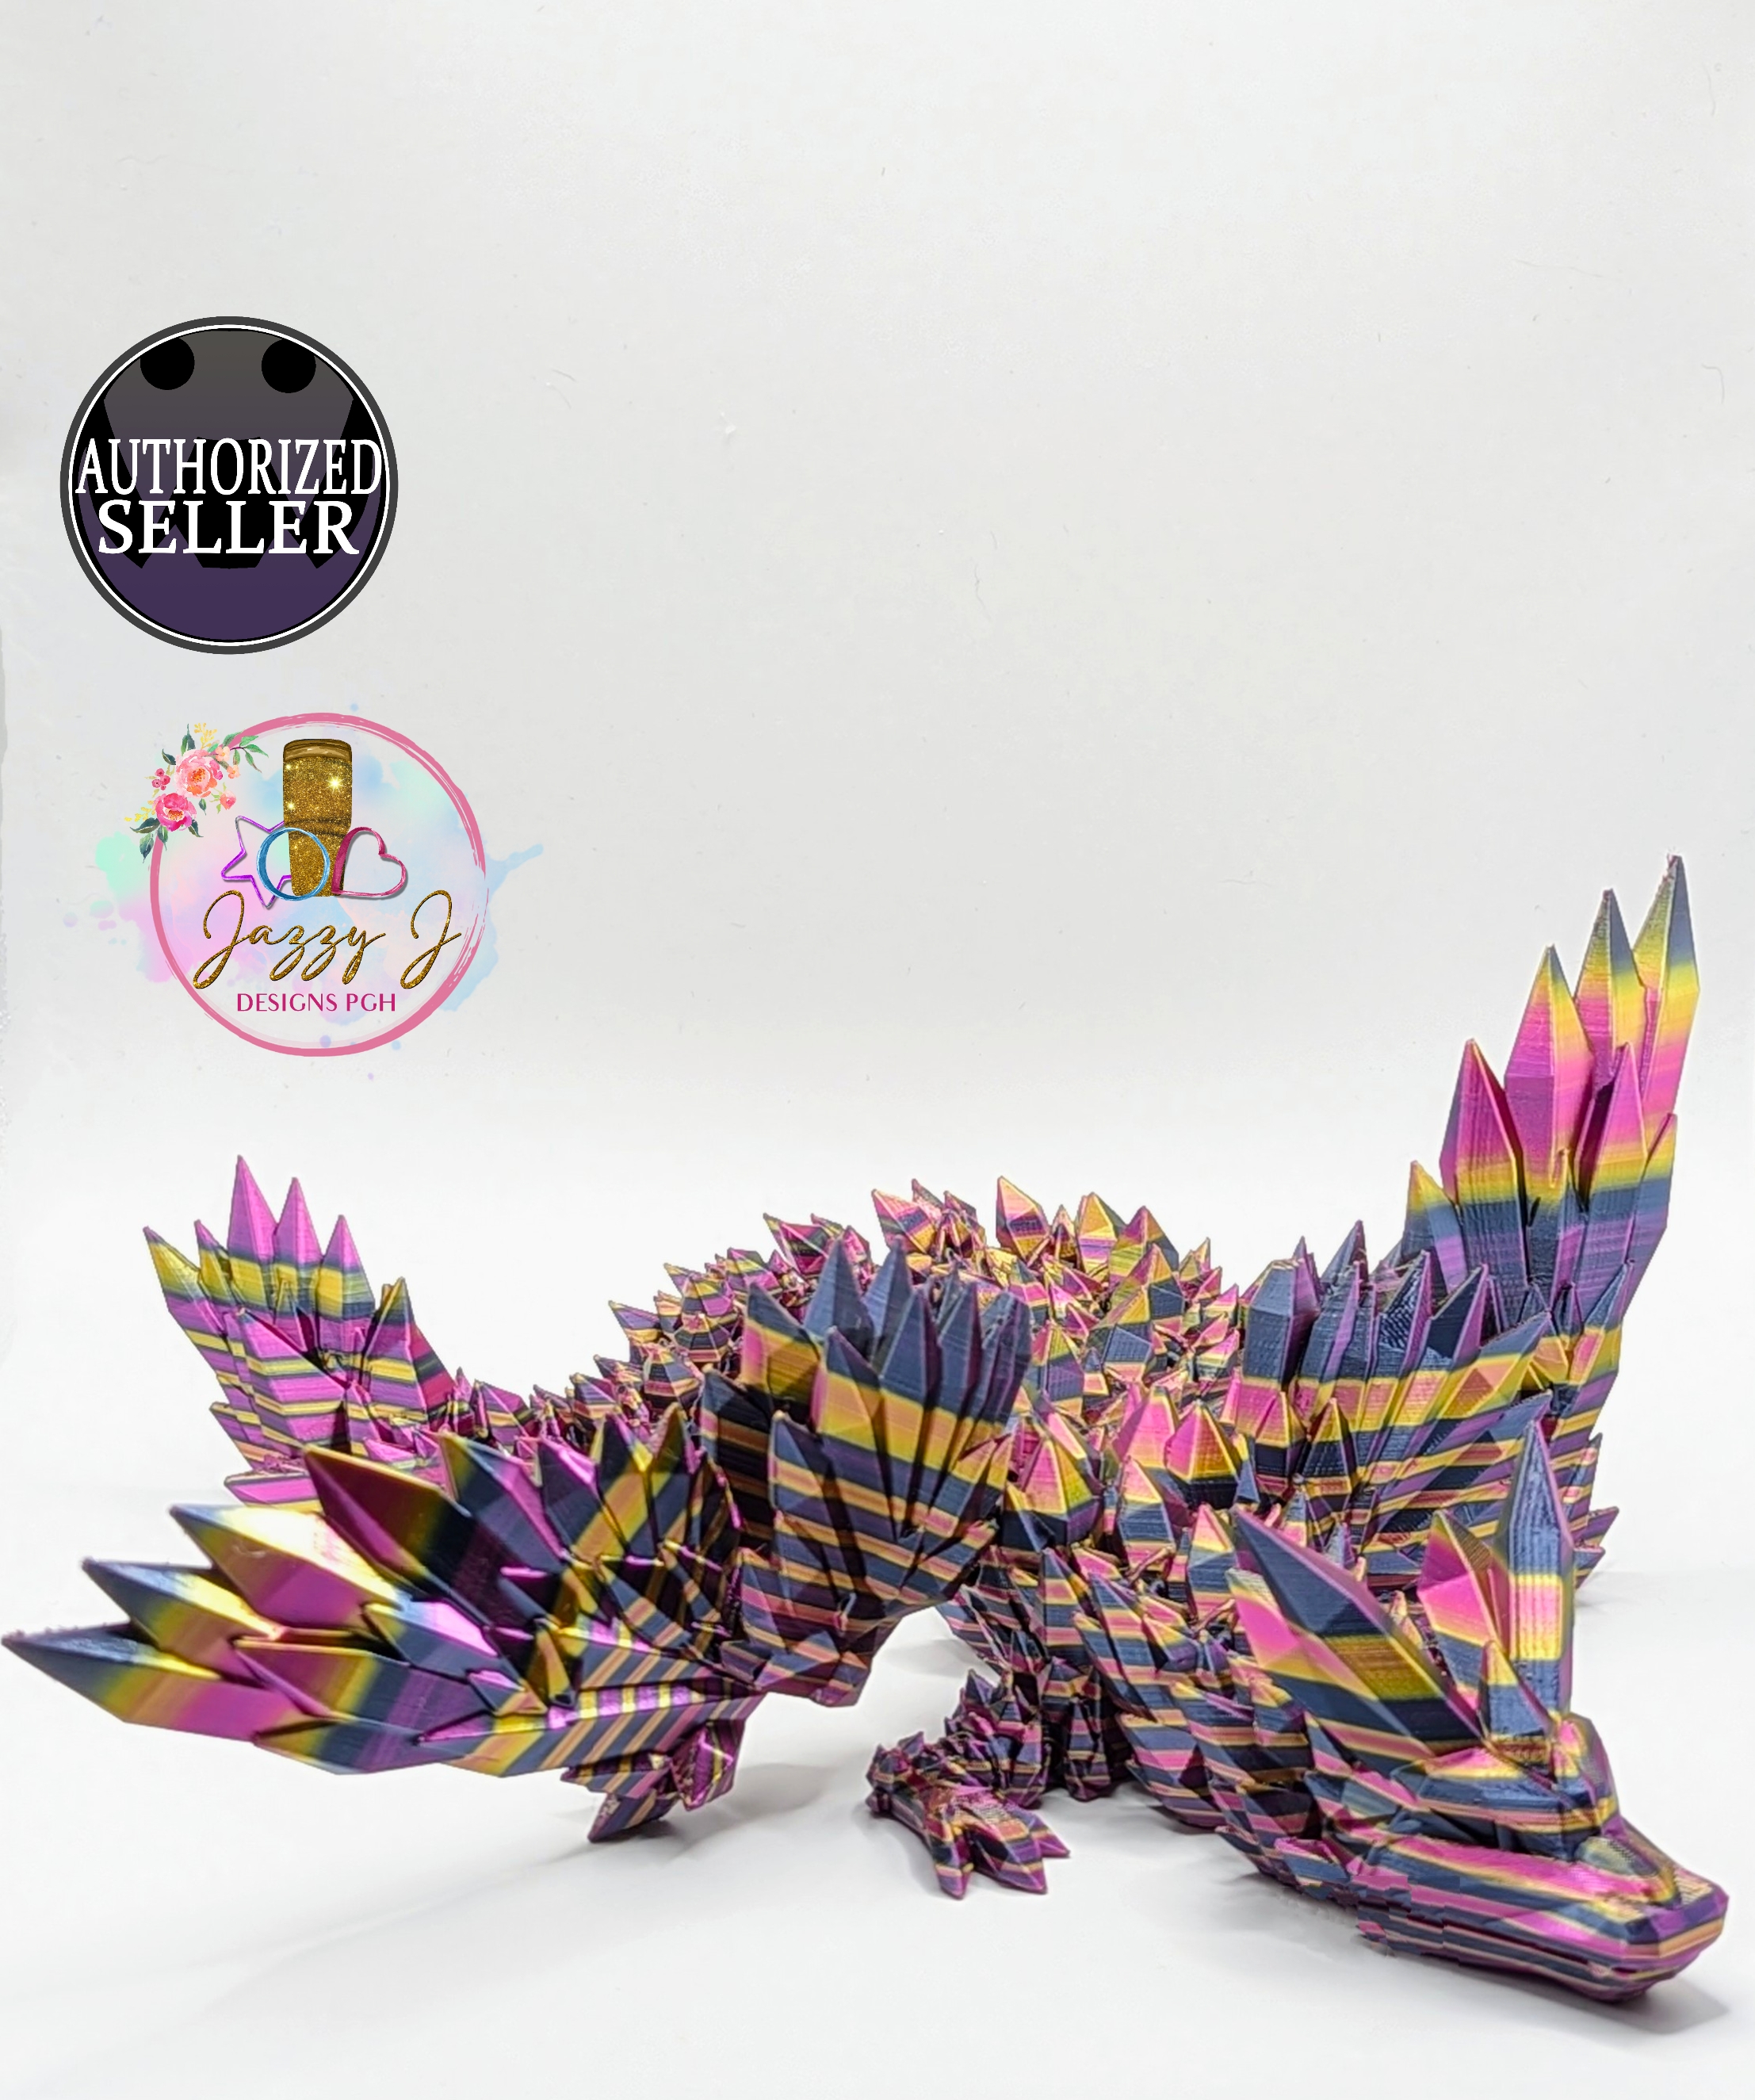 Crystal Wing Dragon Fidget Toy - Articulated Crystal Wing Dragon